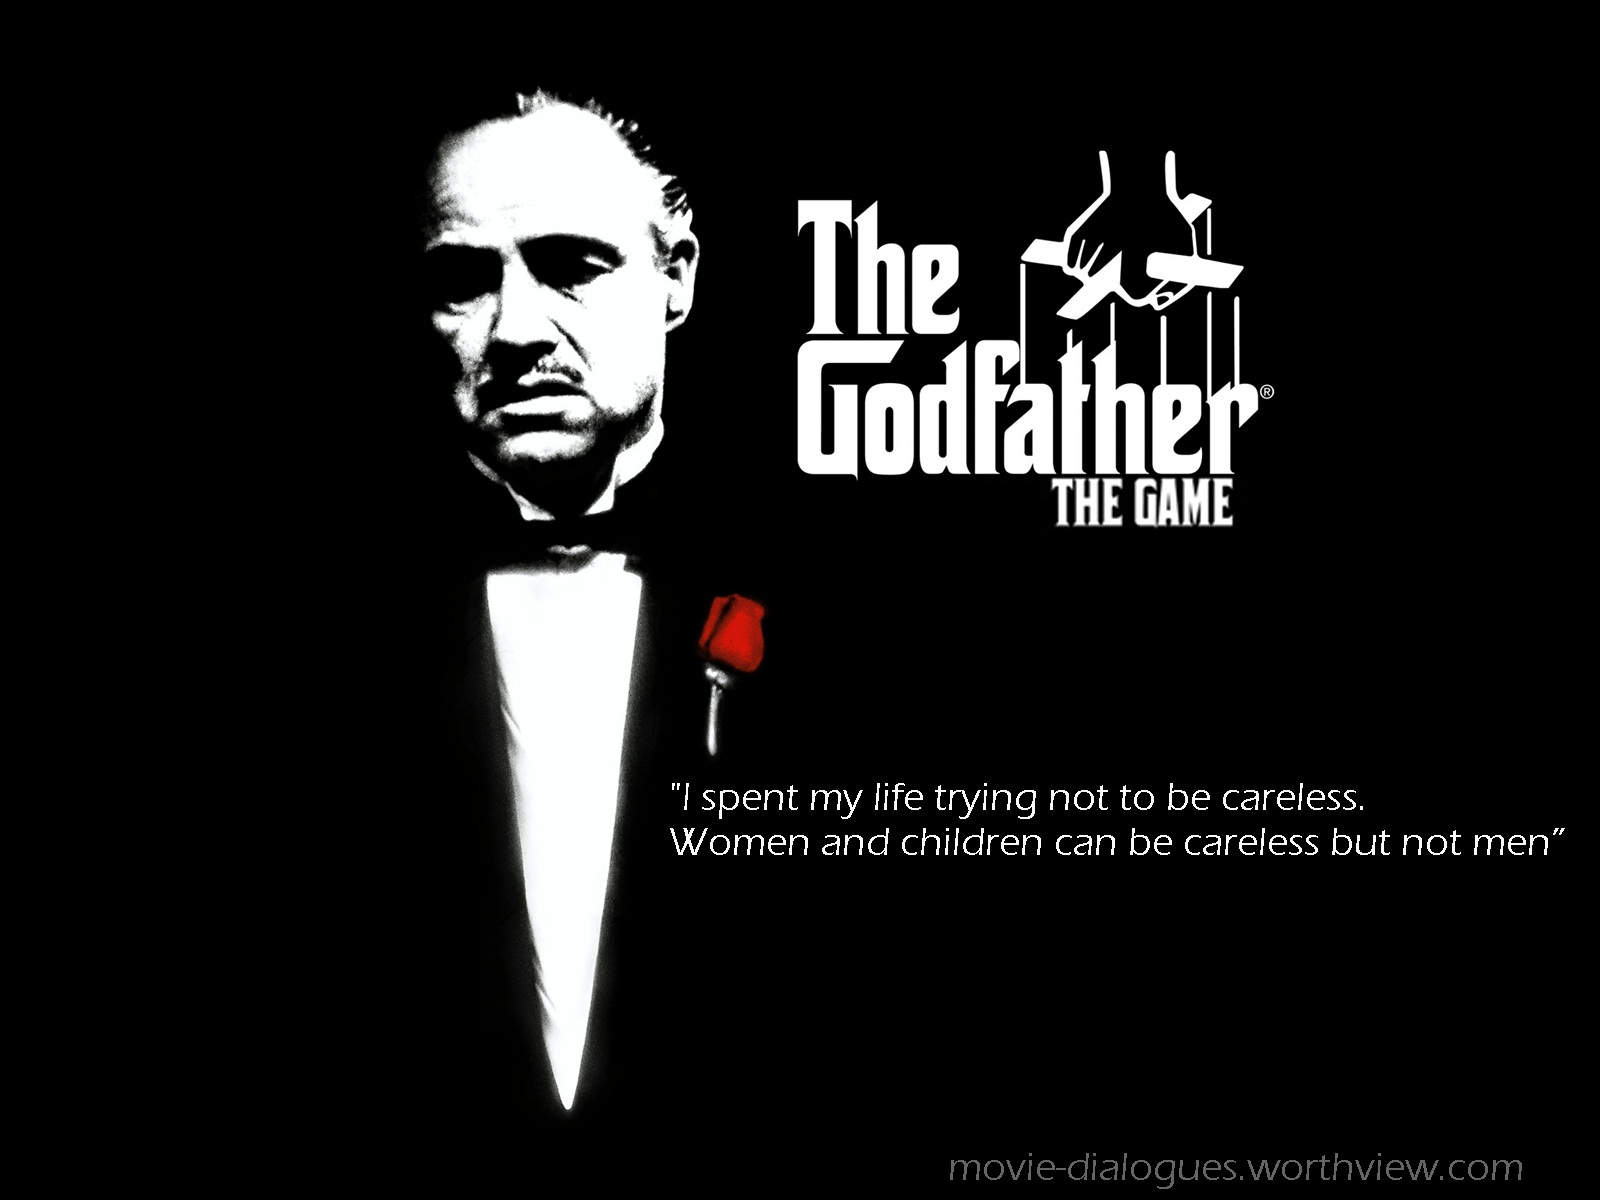 “The GodFather” movie quotes - Movie Dialogues